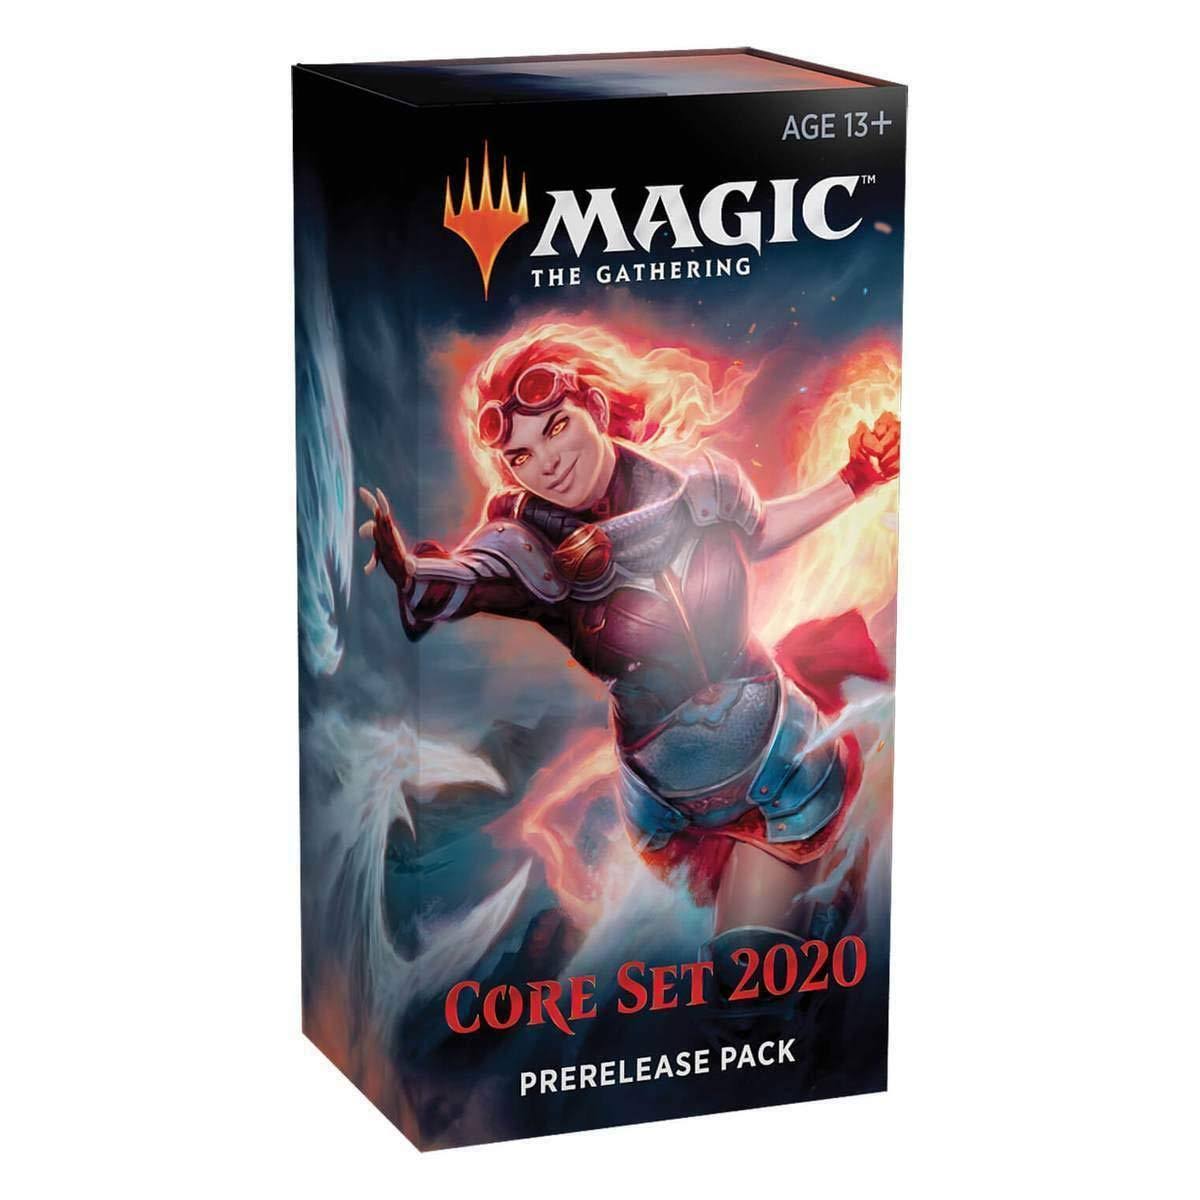 Magic The Gathering Core Set 2020 Prerelease Pack